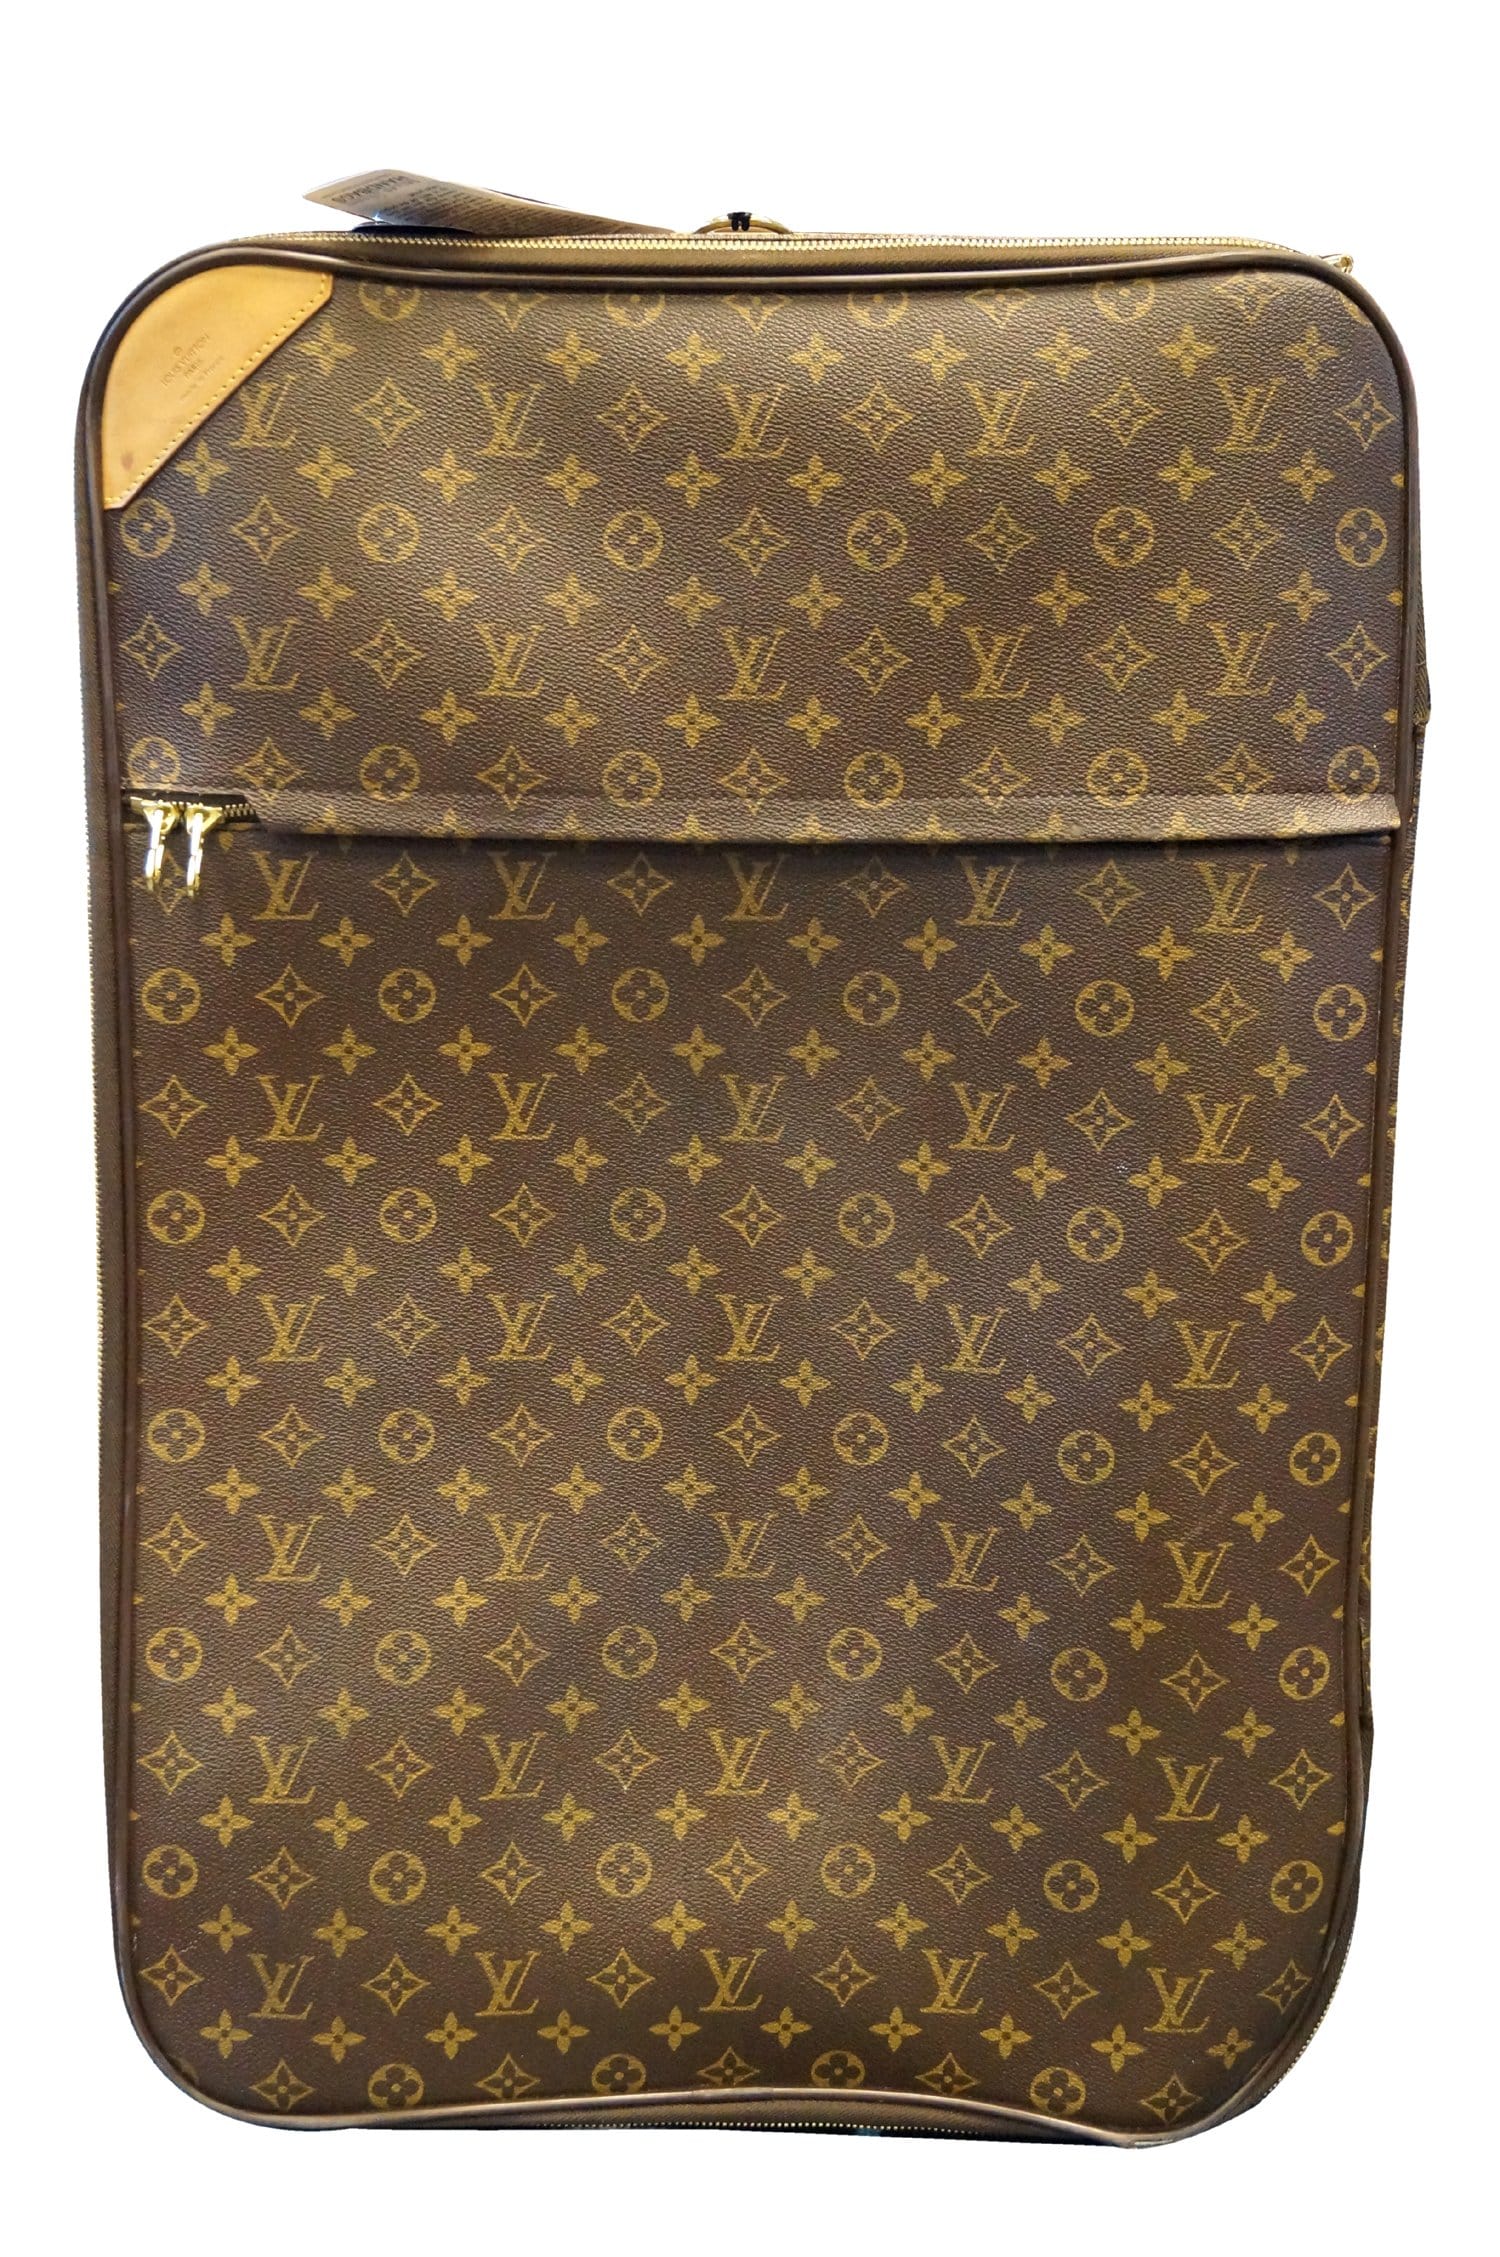 Leather travel suitcase Louis Vuitton Monogram Pegase Legere 65 Suitcase.  in General/other